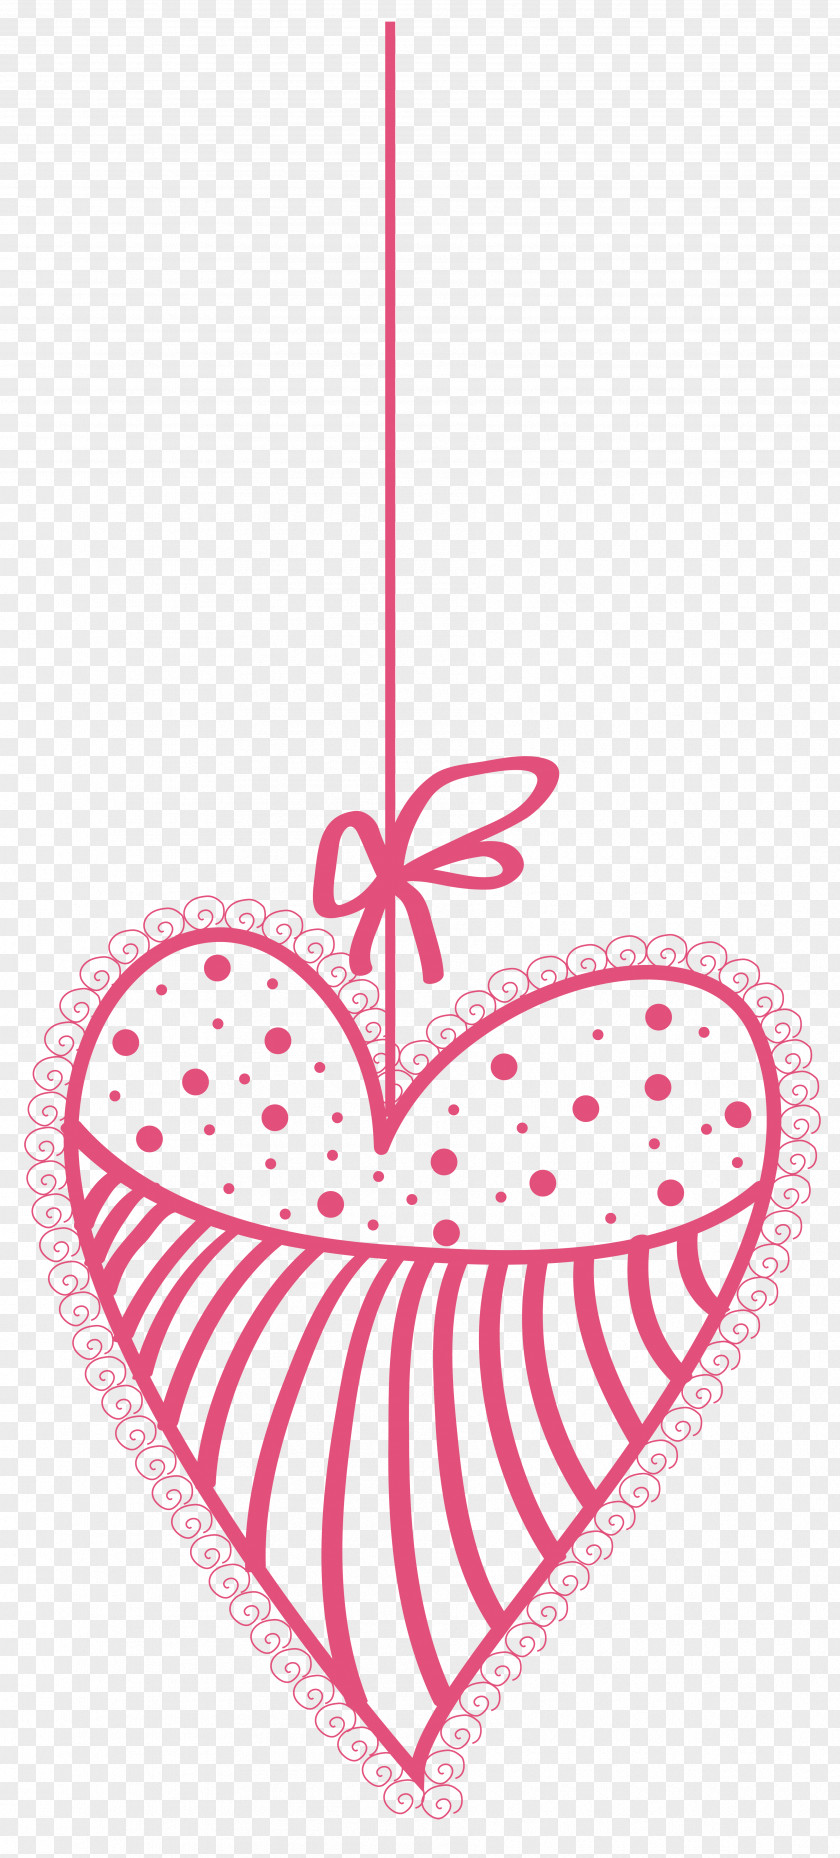 PINK HEARTS Heart Valentine's Day Love Clip Art PNG